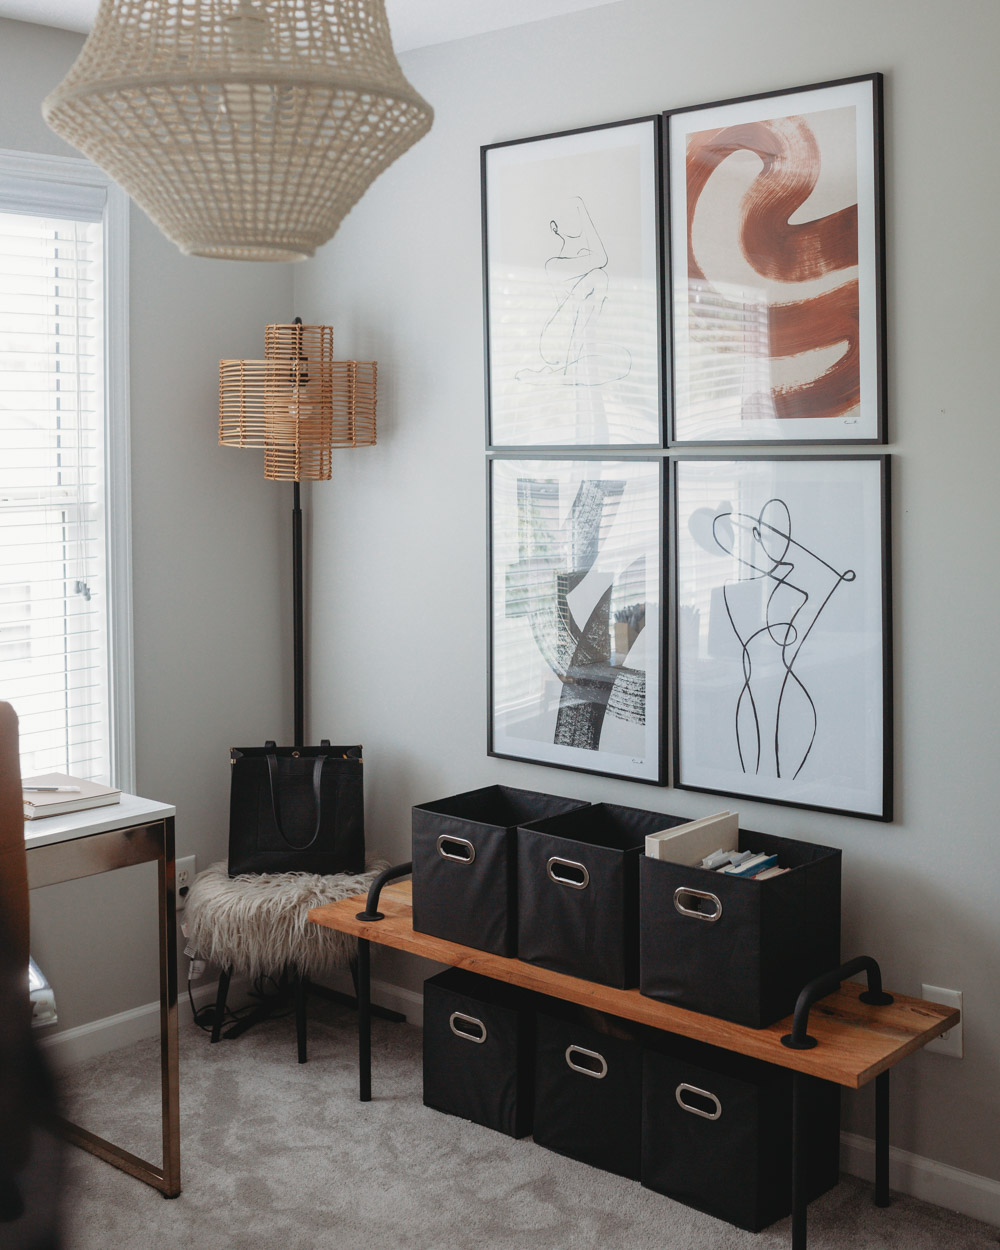 A room featuring an industrial bench, bohemian floor lamp, and large artwork on the walls.